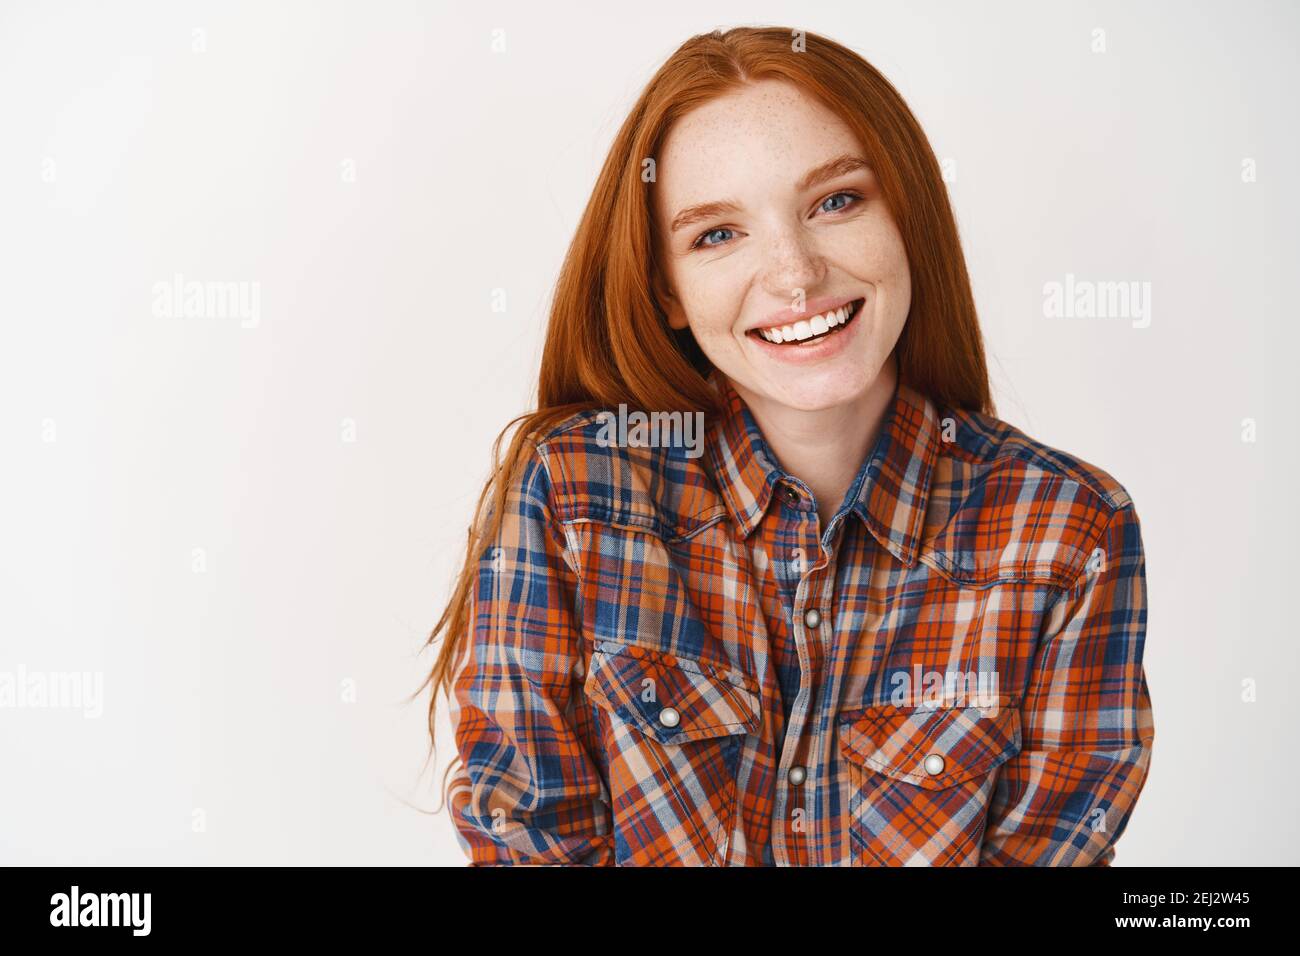 Young redhead woman with pale skin and white smile looking happy at camera, standing over white background Stock Photo